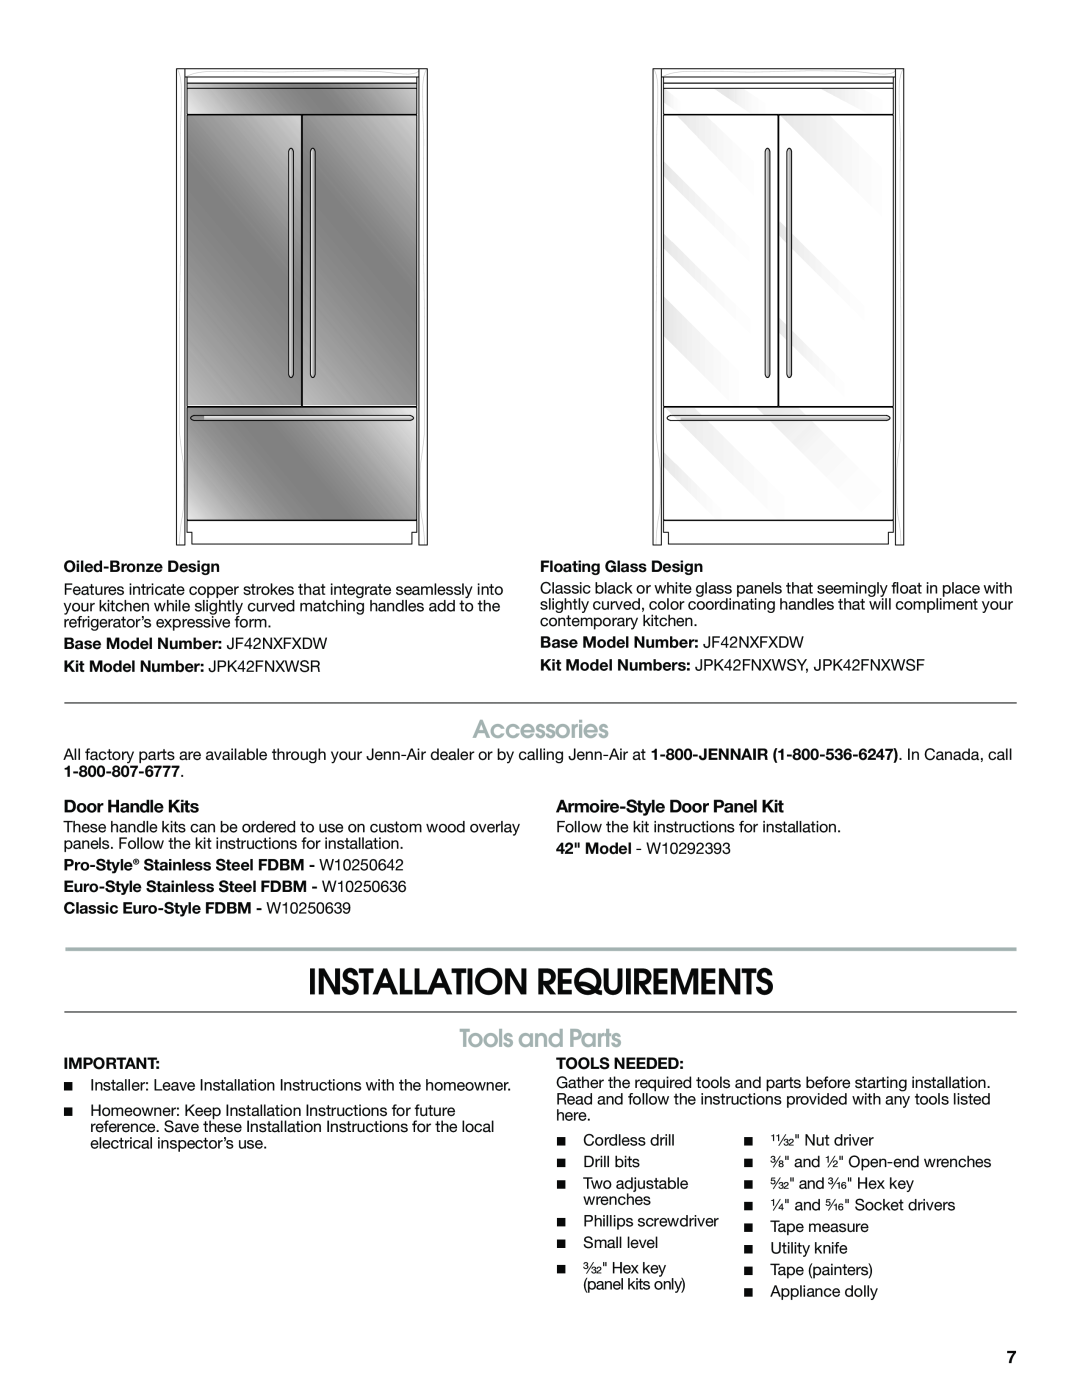 Jenn-Air W10379137A Installation Requirements, Tools and Parts, Accessories, Door Handle Kits, Armoire-StyleDoor Panel Kit 